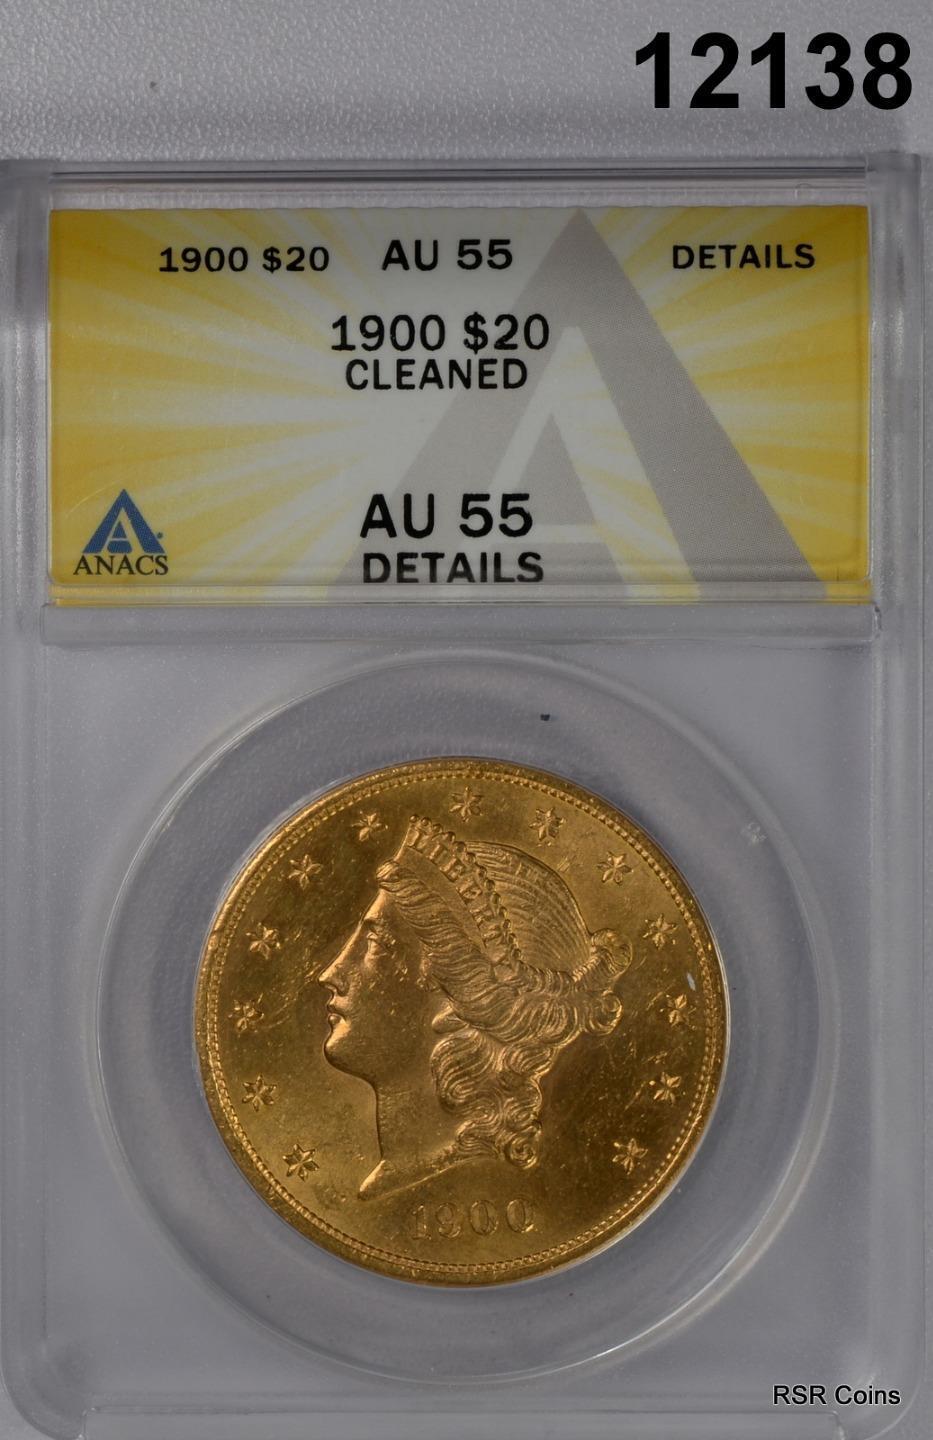 1900 $20 GOLD LIBERTY ANACS CERTIFIED AU55 CLEANED #12138